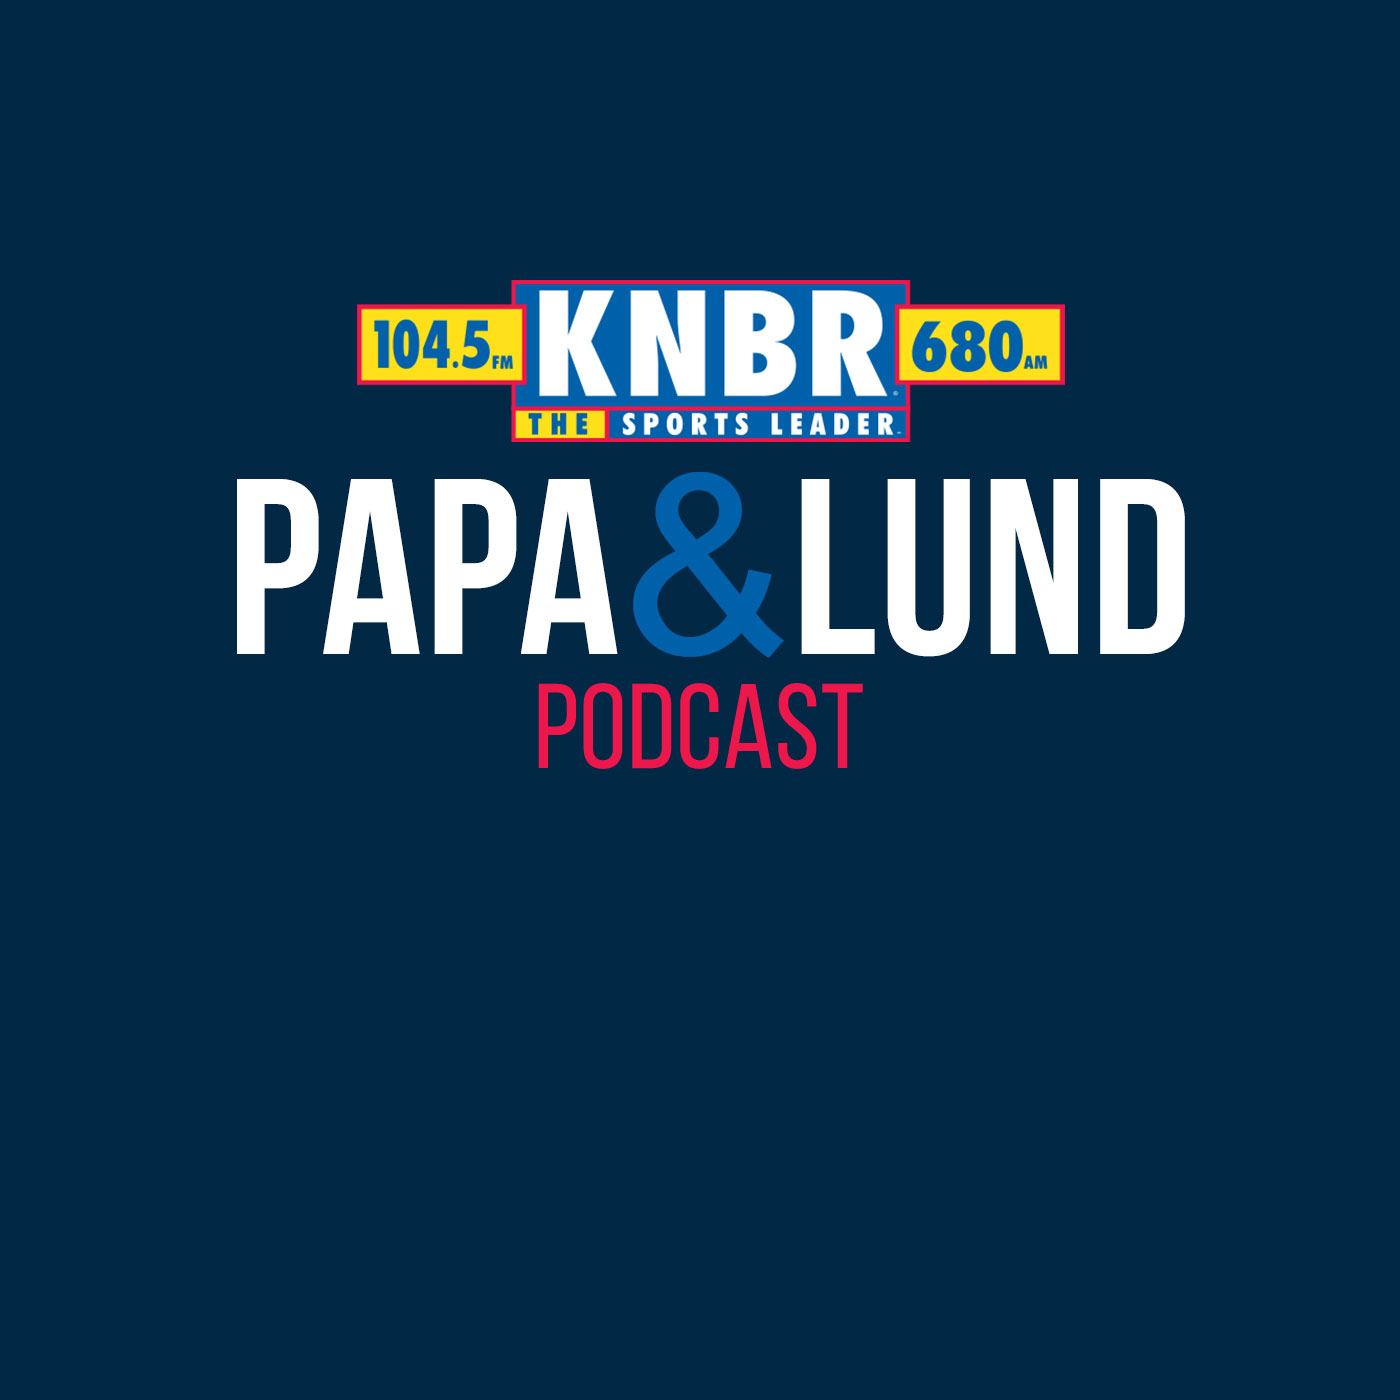 4-14 Carmichael Dave tells Papa & Lund how the Kings could possibly upset the Warriors in Round 1